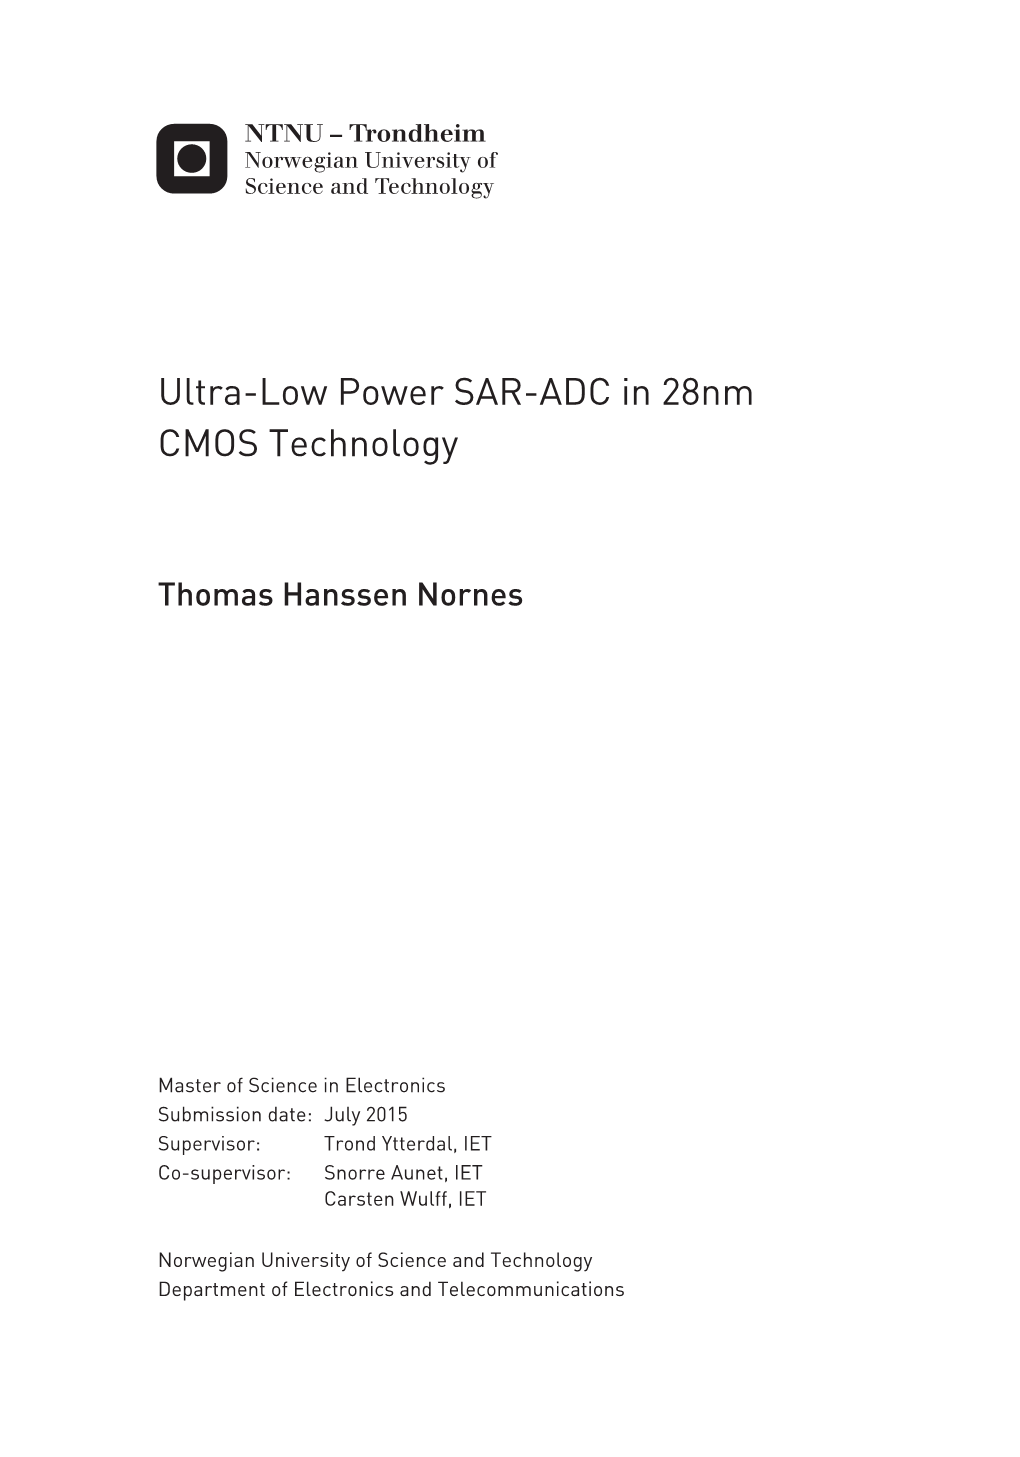 Ultra-Low Power SAR-ADC in 28Nm CMOS Technology